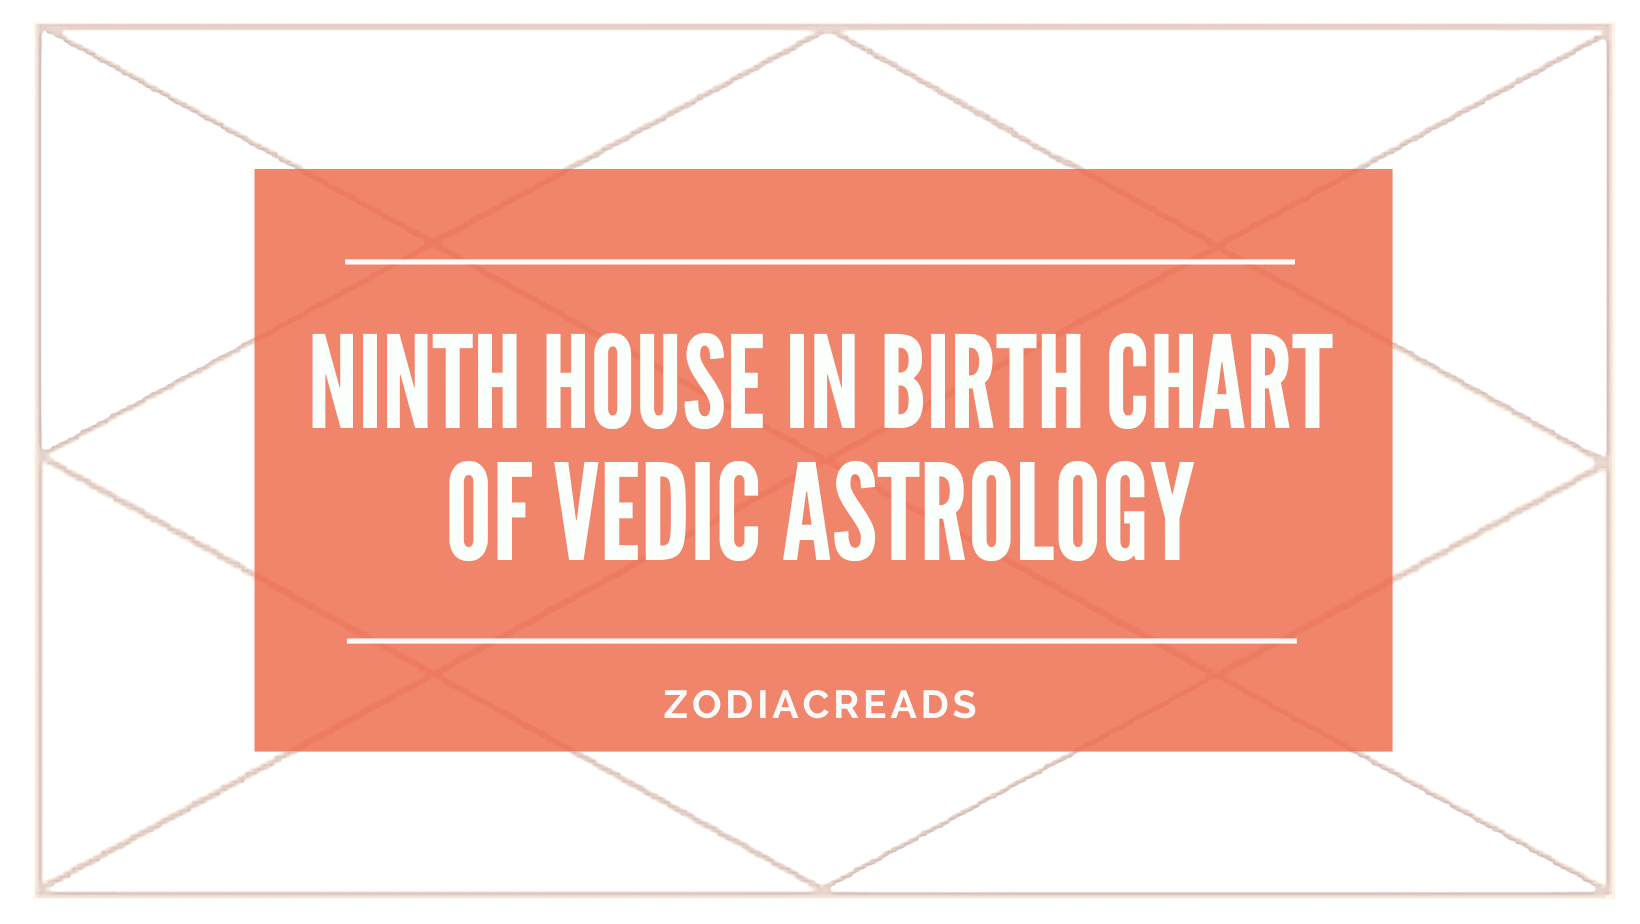 Ninth house in birth chart of vedic astrology